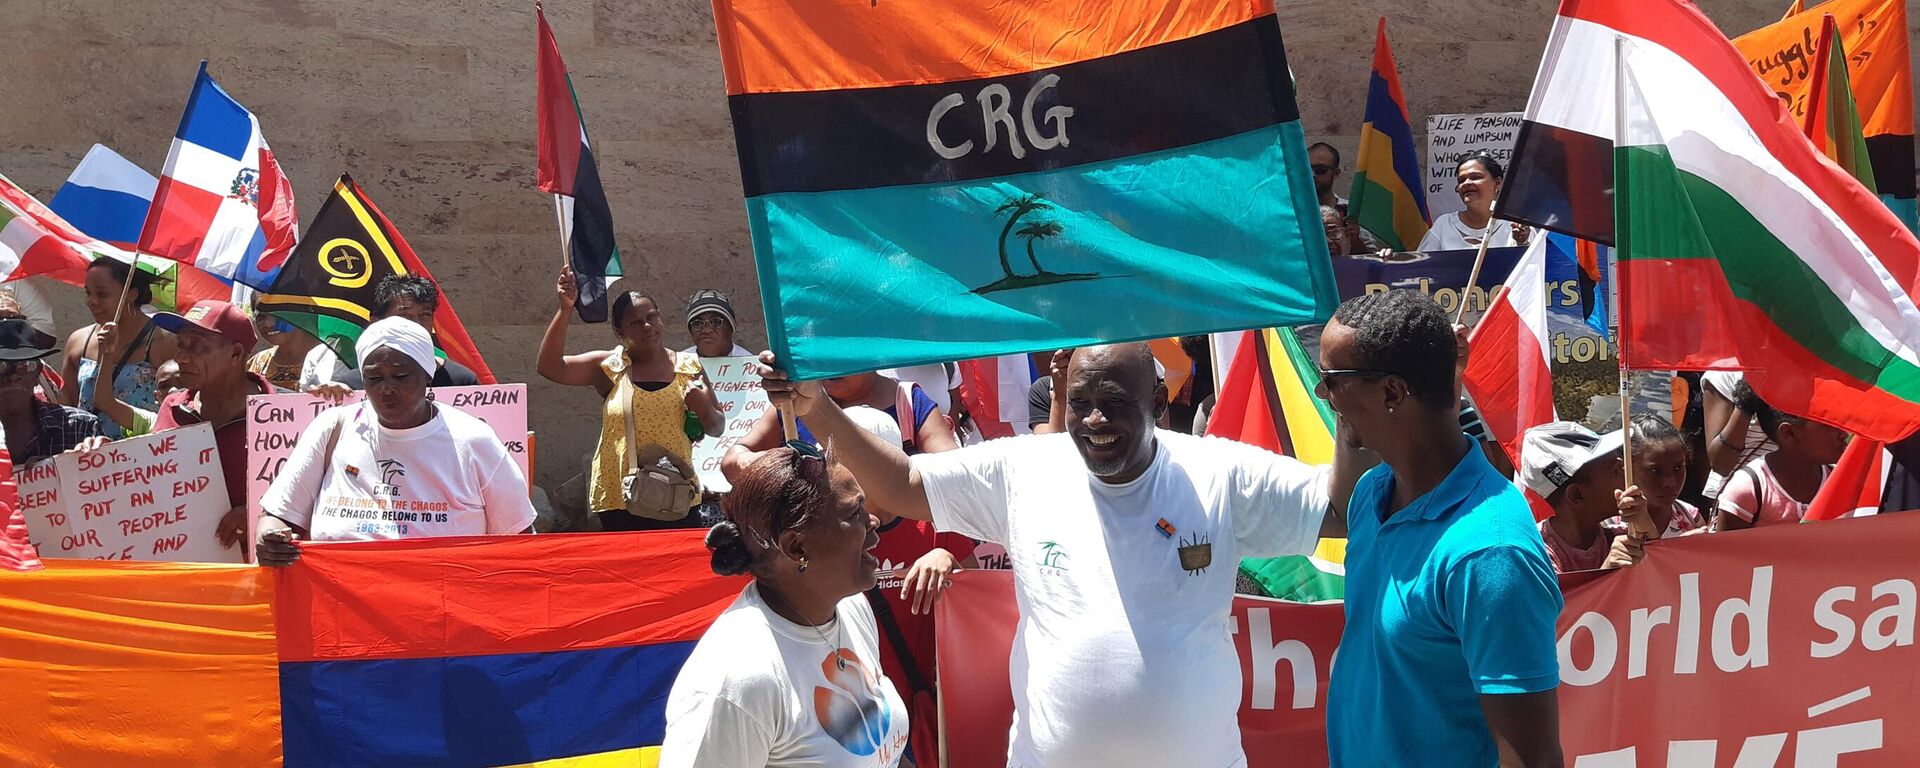 Demonstrators from the Chagos Islands protested at a British defiance of a United Nations deadline to end their illegal occupation of the Indian Ocean archipelago in Port Louis on November 22, 2019. - Sputnik International, 1920, 20.02.2023